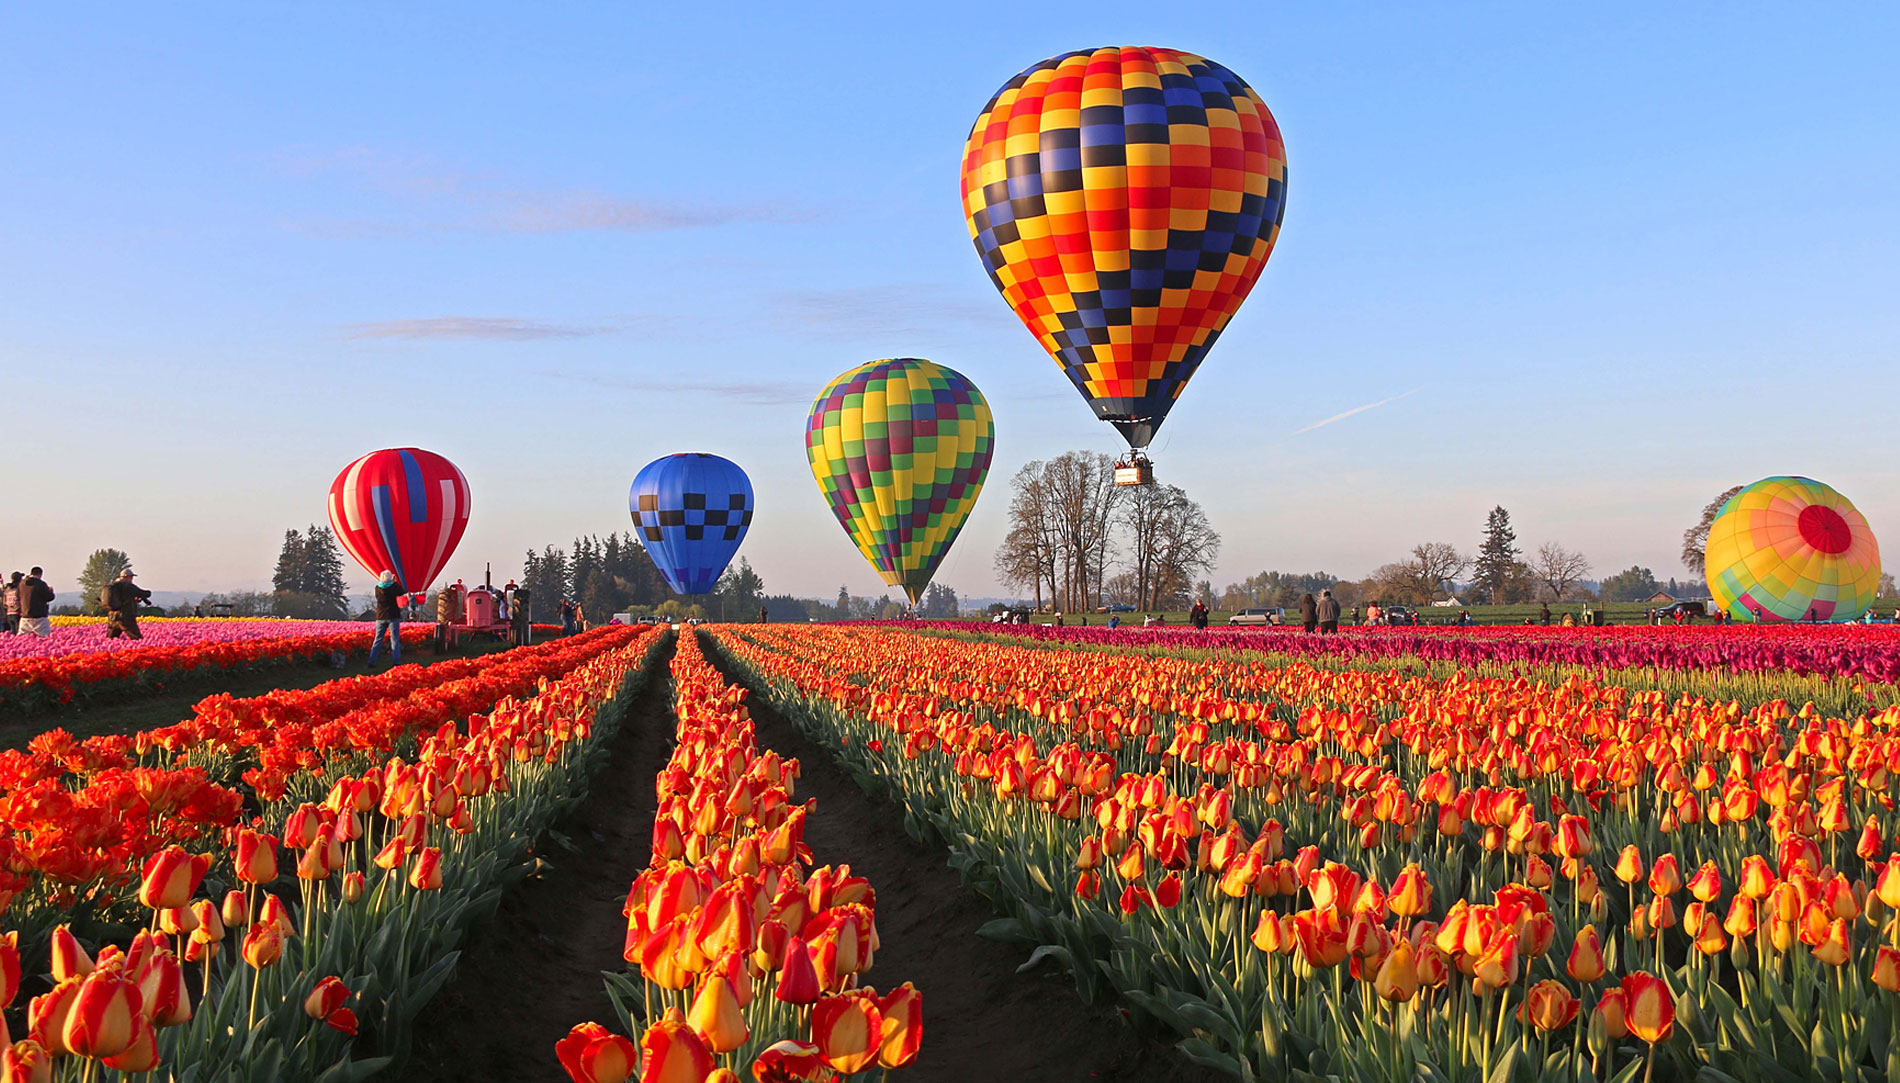 Hot air balloons over rows of tulips at the Wooden Shoe Tulip Fest in Oregon